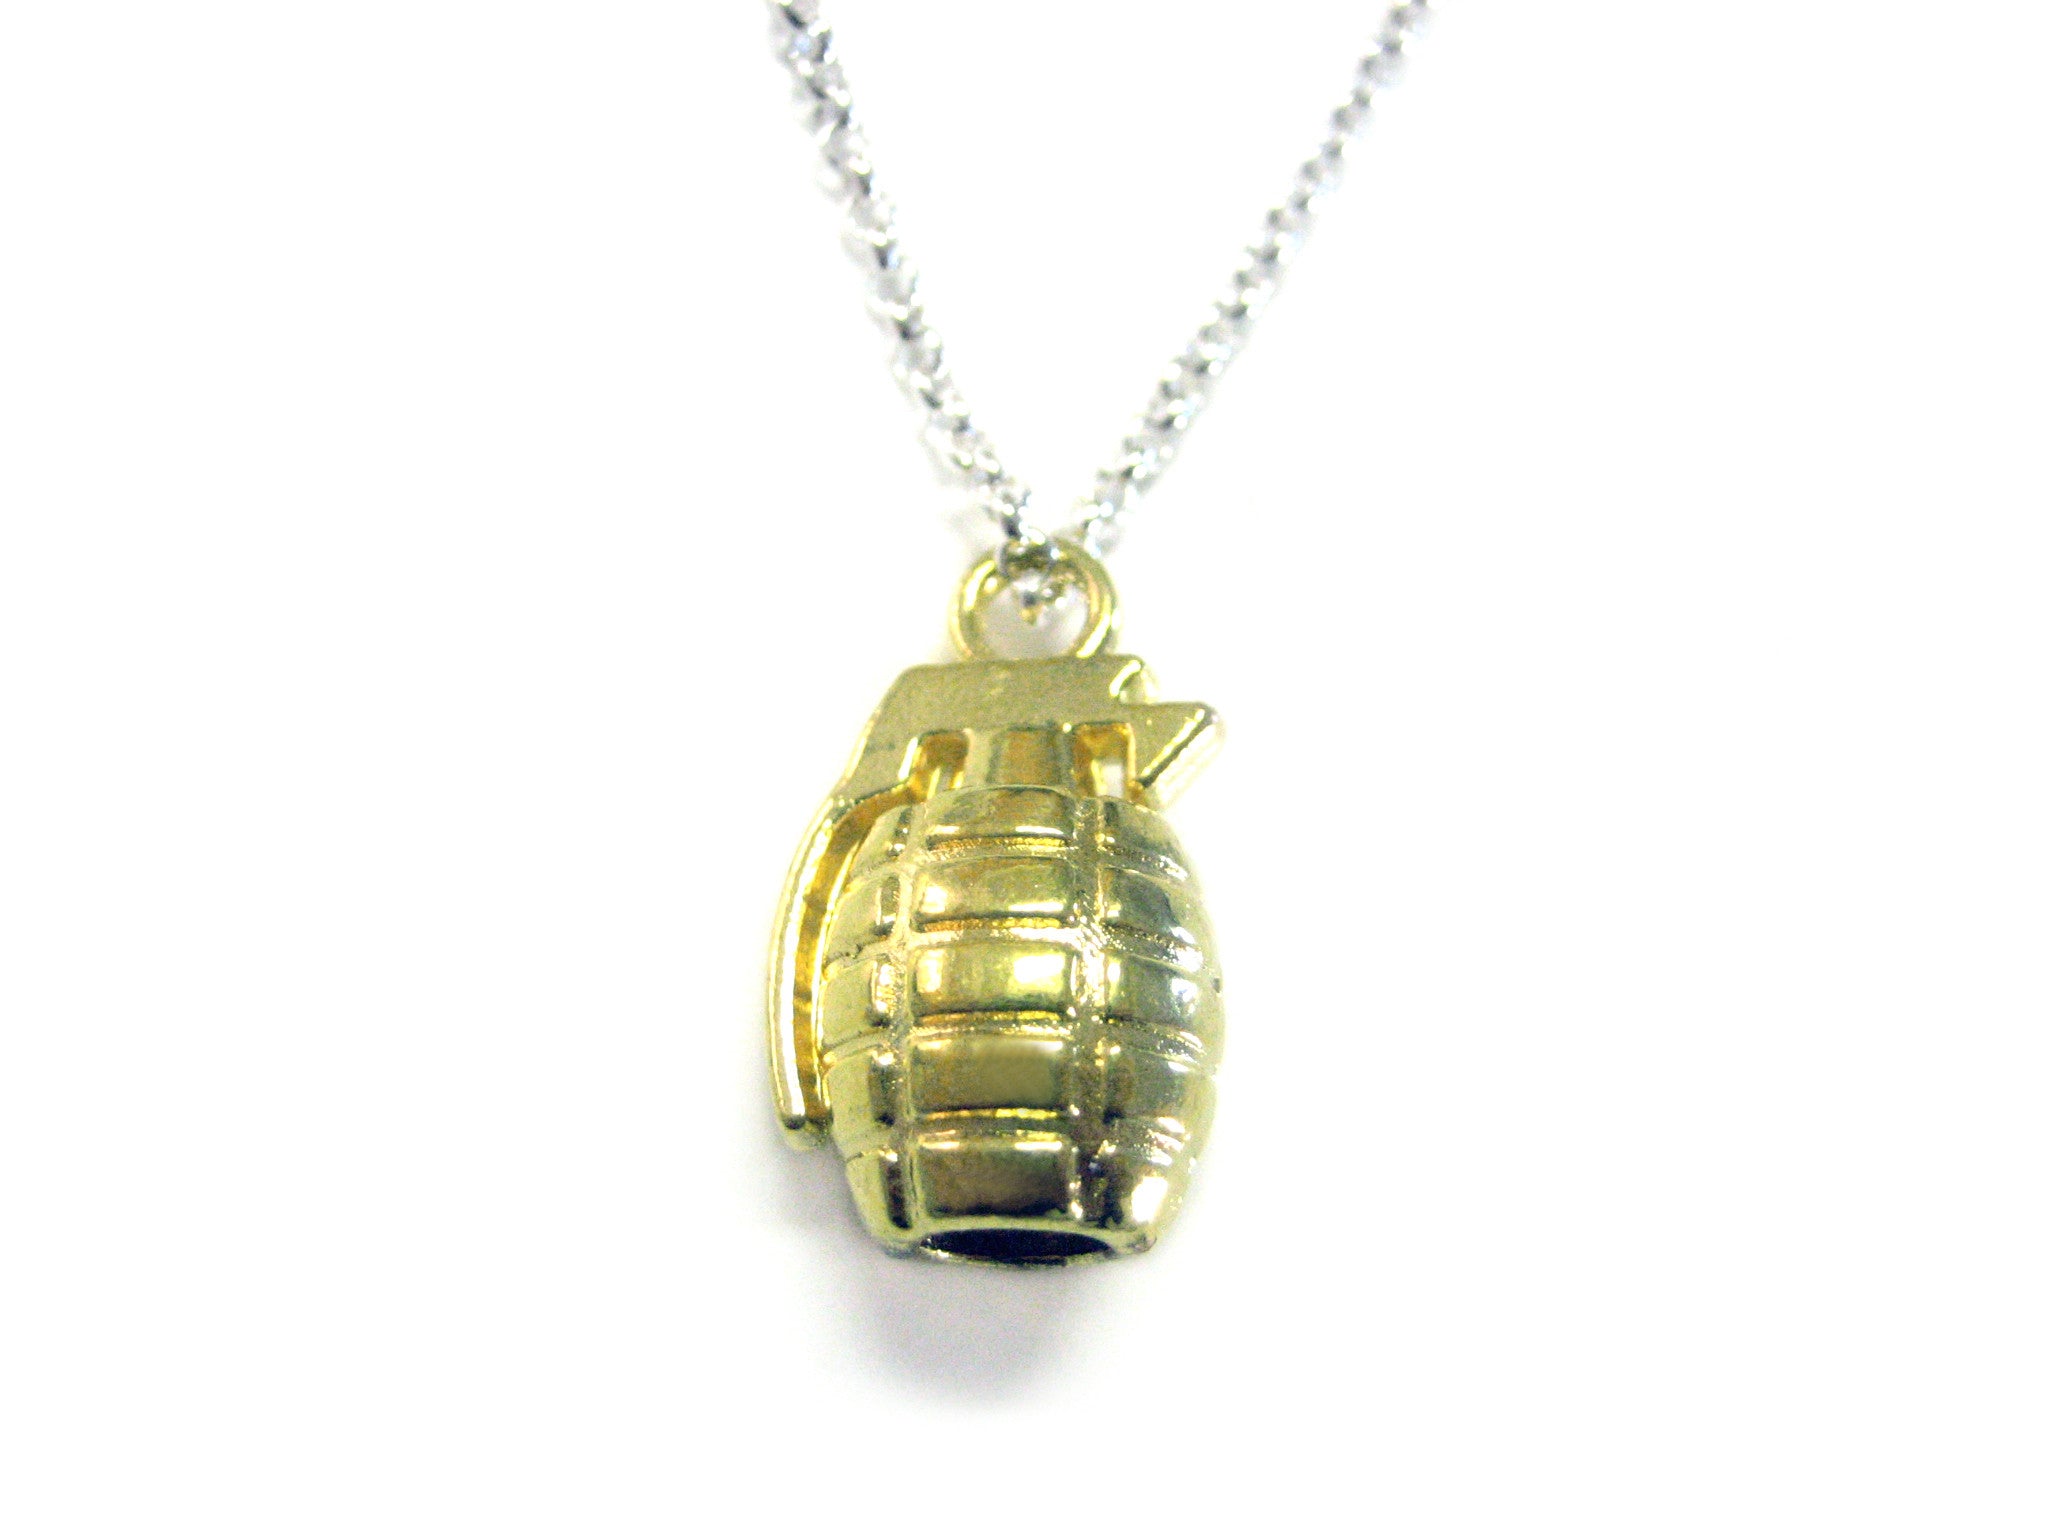 Gold Toned Grenade Pendant Necklace